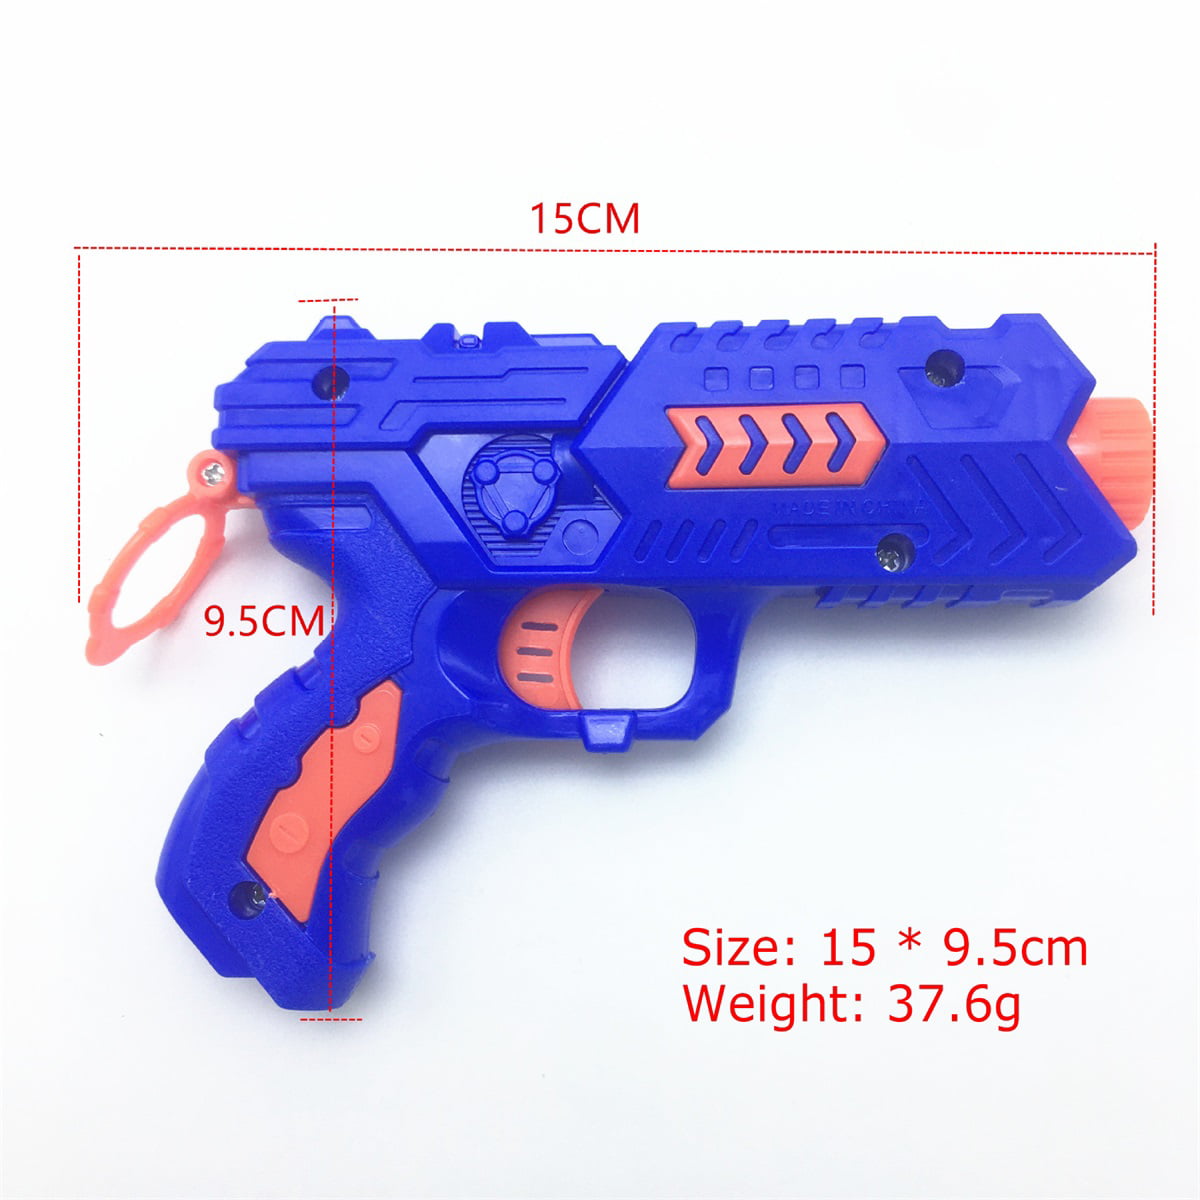 Teens and Boys Girls Topper-E Running Shooting Targets for Nerf Guns，Electric Target Scoring Auto Reset Upgraded 4 Games Modes for Kids Shooting Outdoor Games,Ideal GiftsToys for Kids